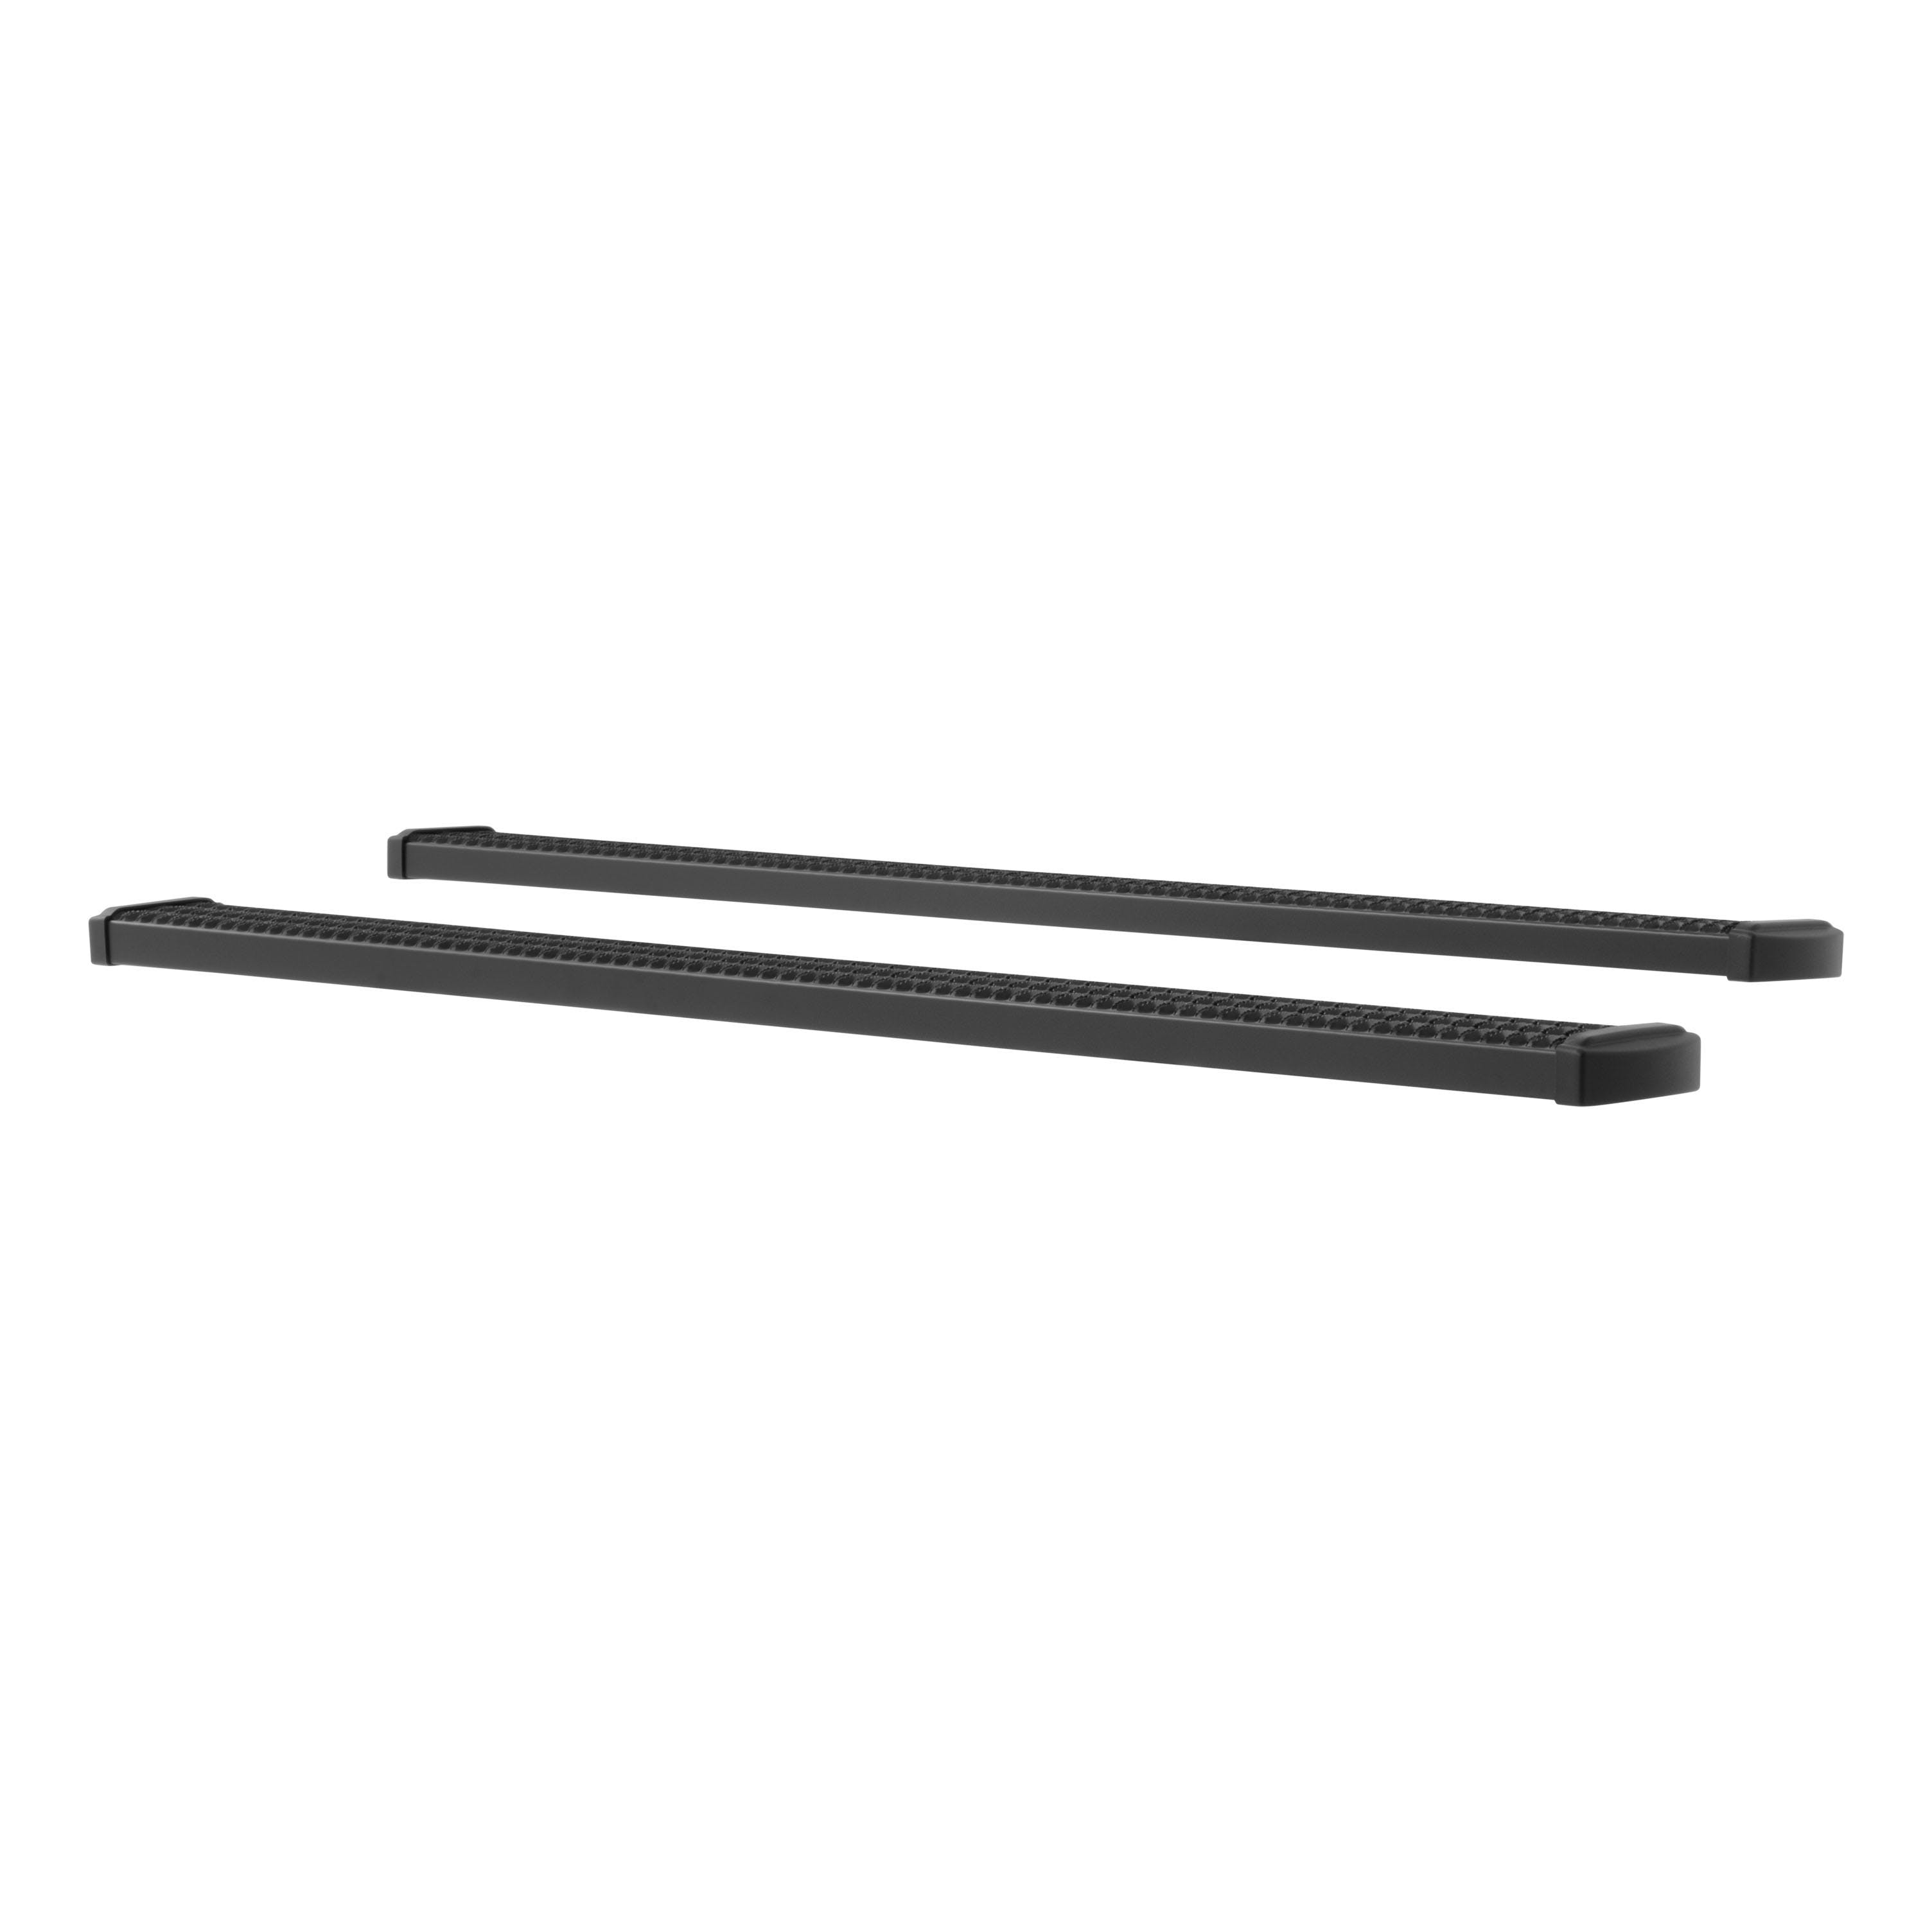 LUVERNE 415088-401443 Grip Step 7 inch Running Boards